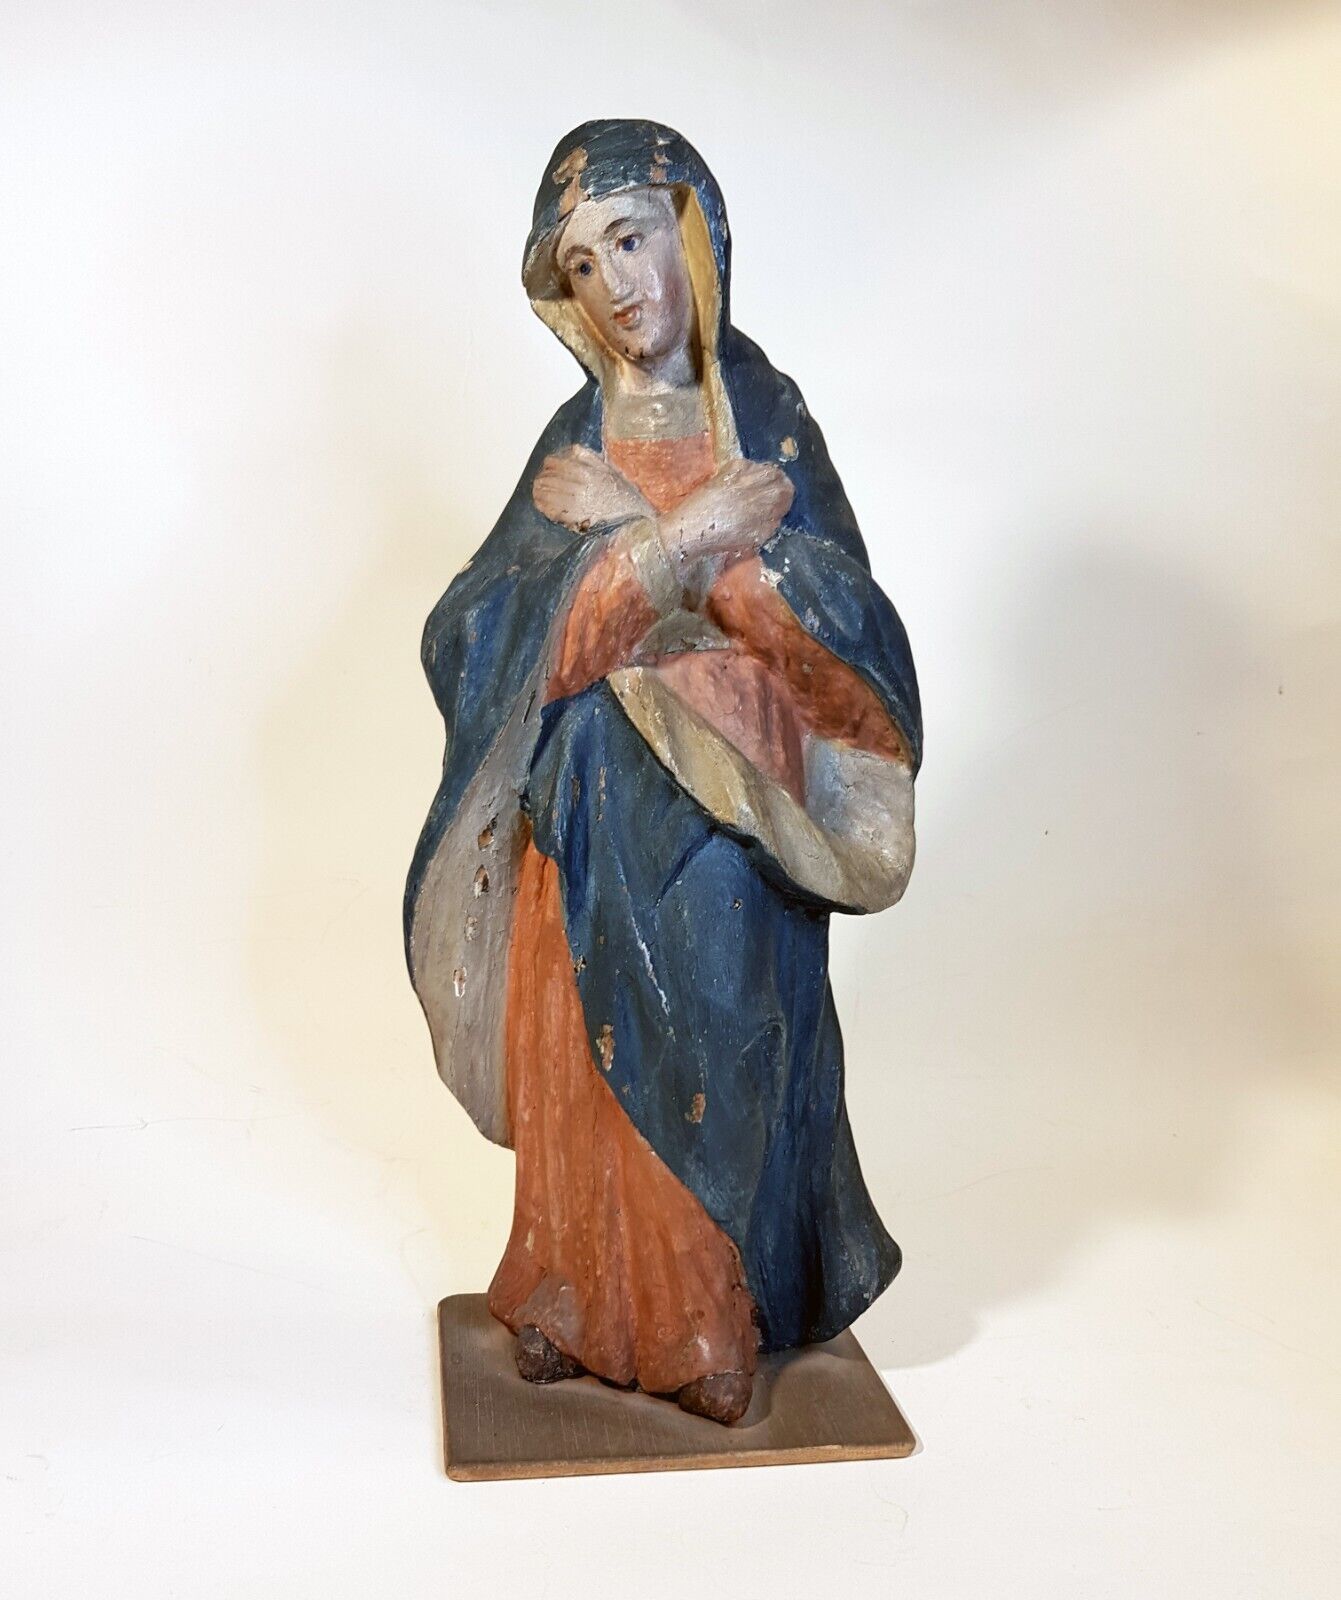 Antique Virgin Mary wood figure hand carved & painted  baroque style 18th/19th c